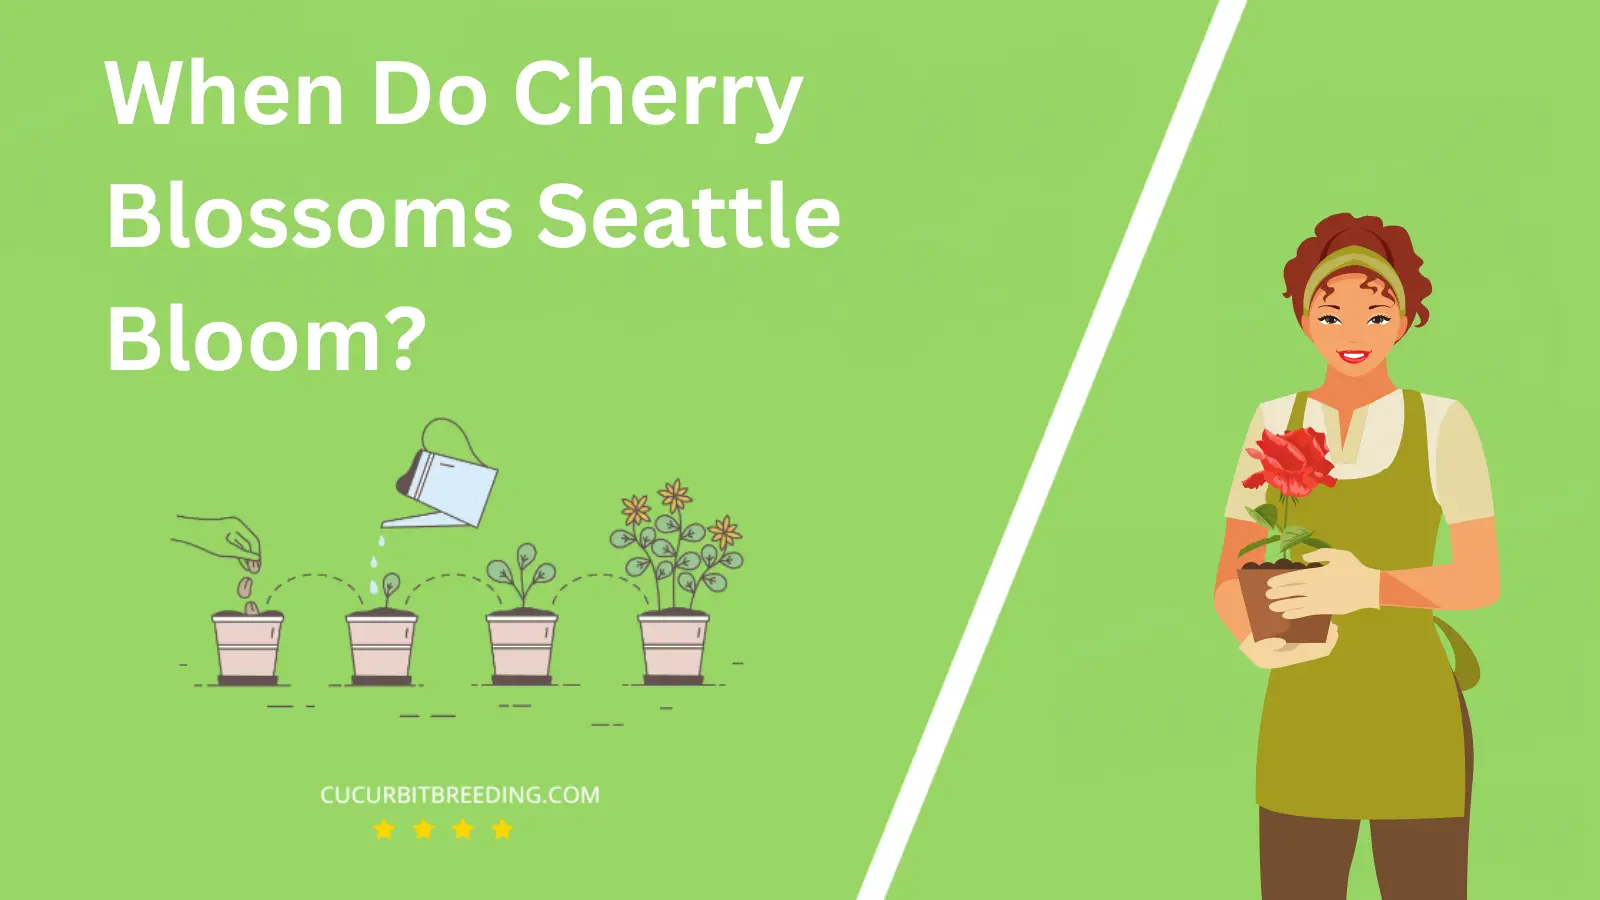 When Do Cherry Blossoms Seattle Bloom?